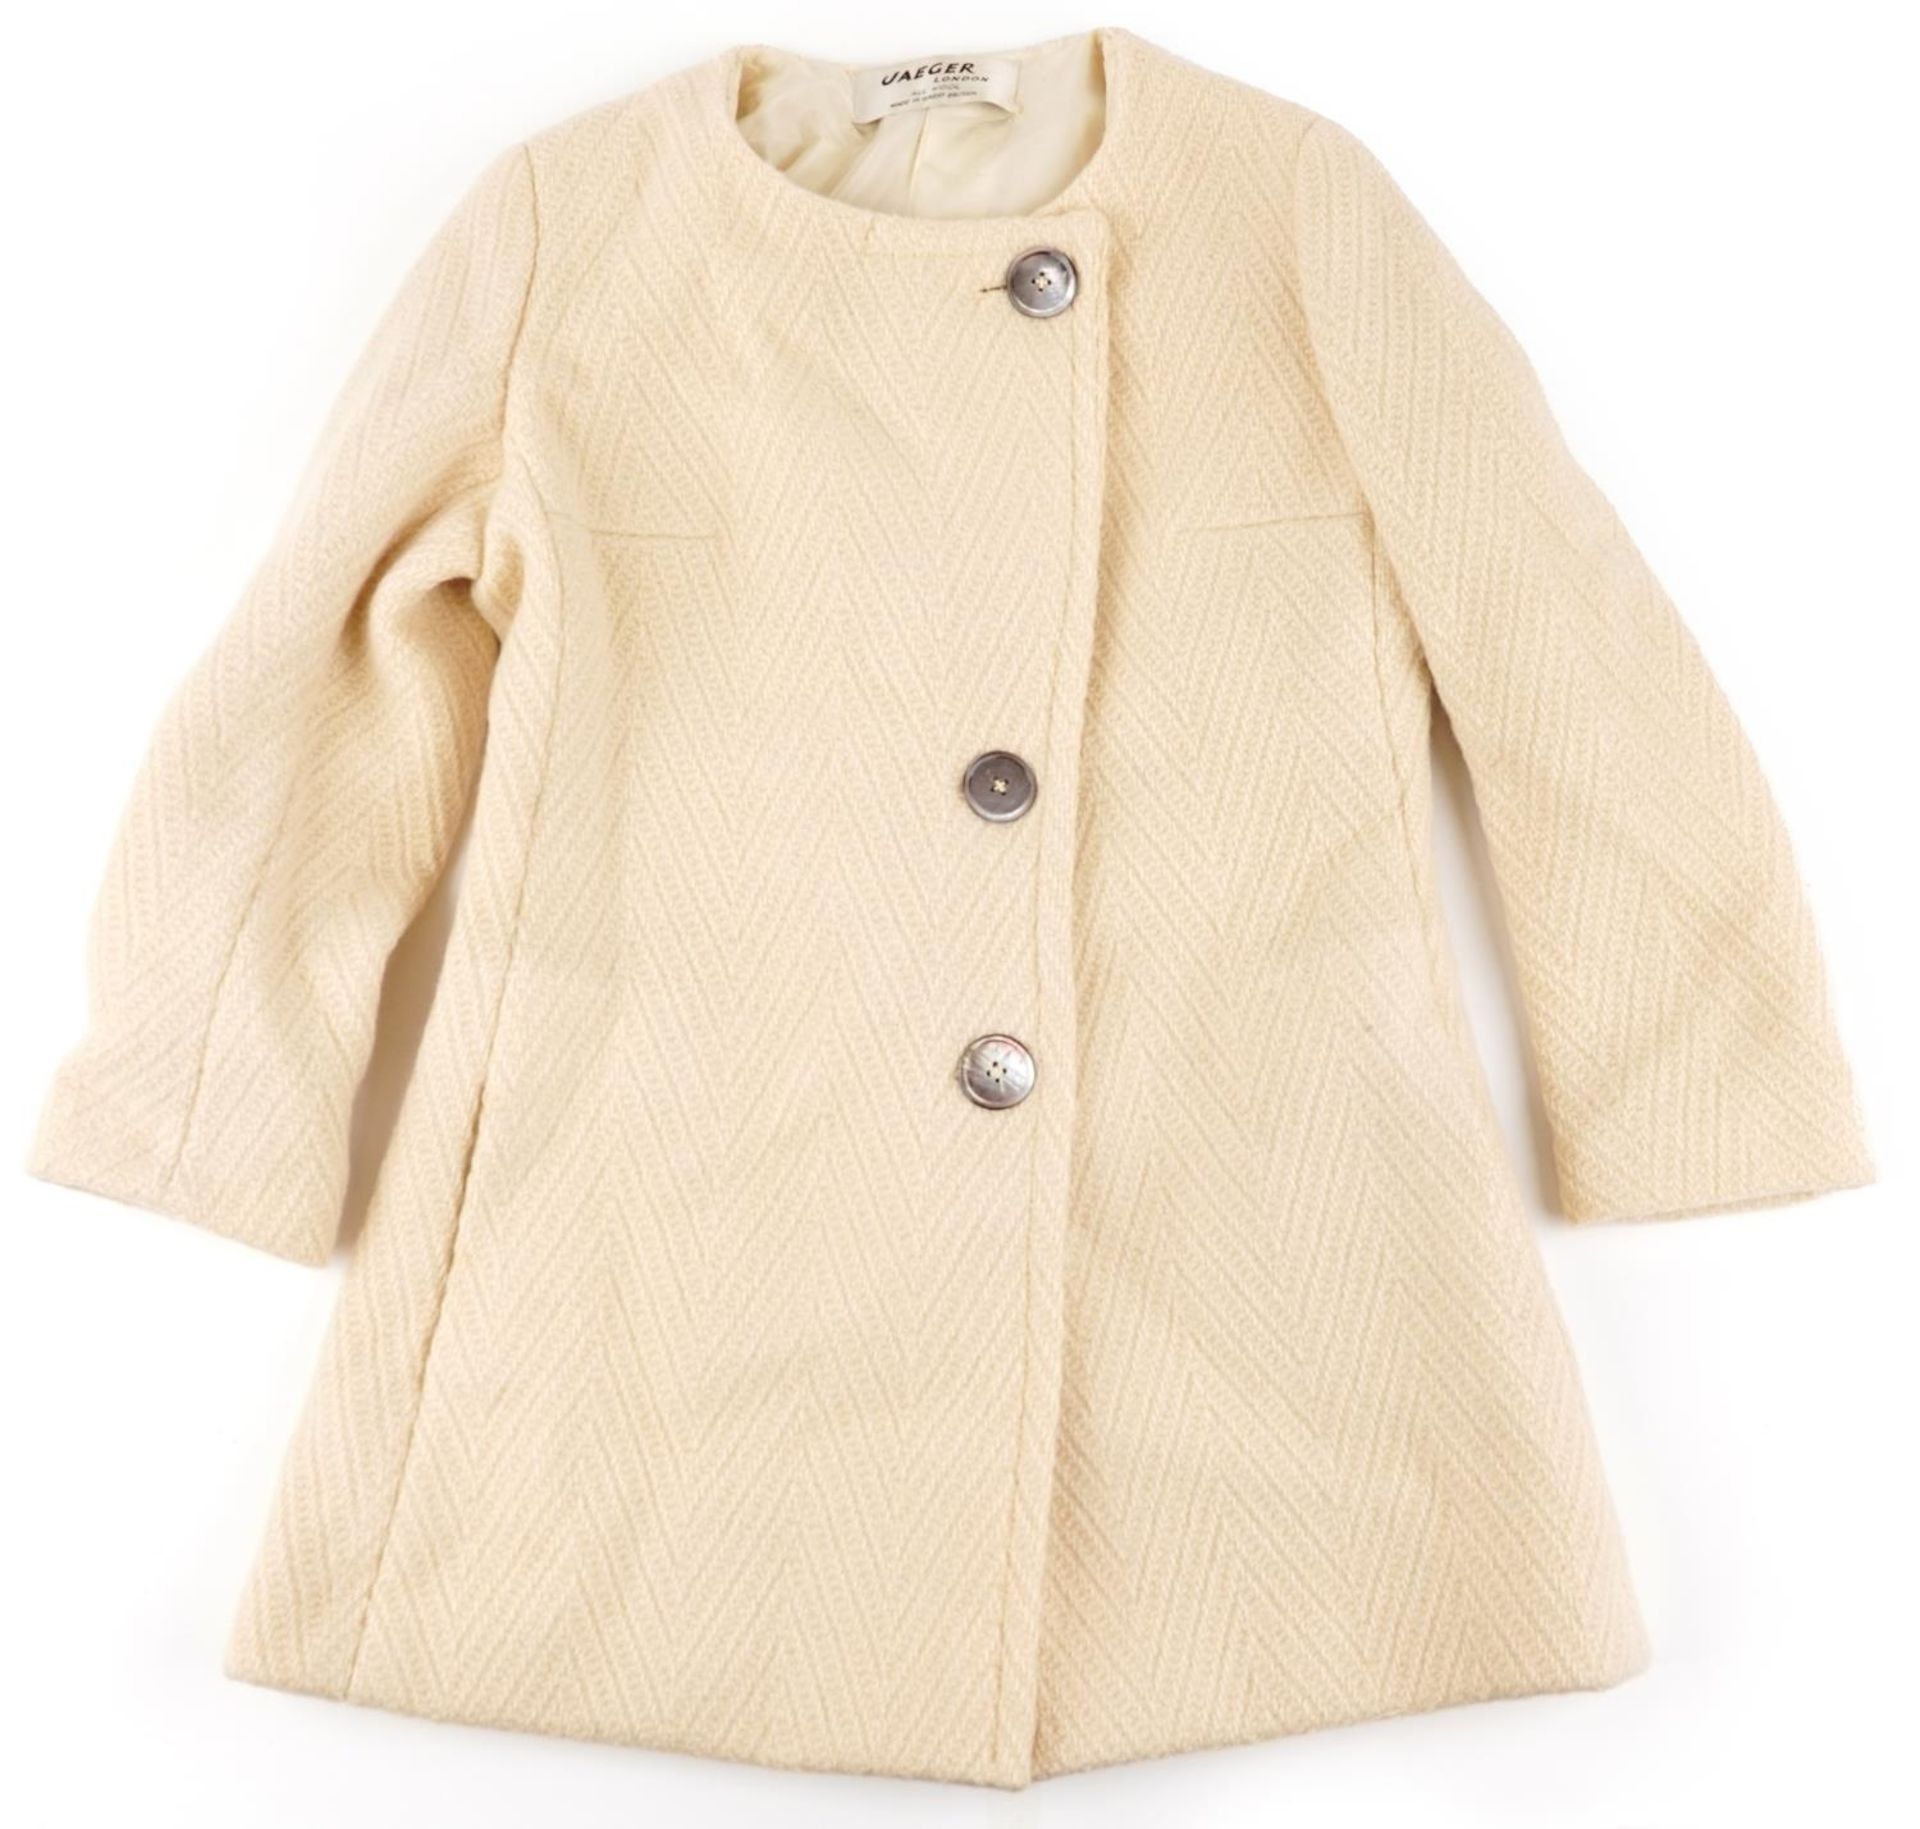 Vintage Jaeger cream woollen coat, size 12-14 : For further information on this lot please visit